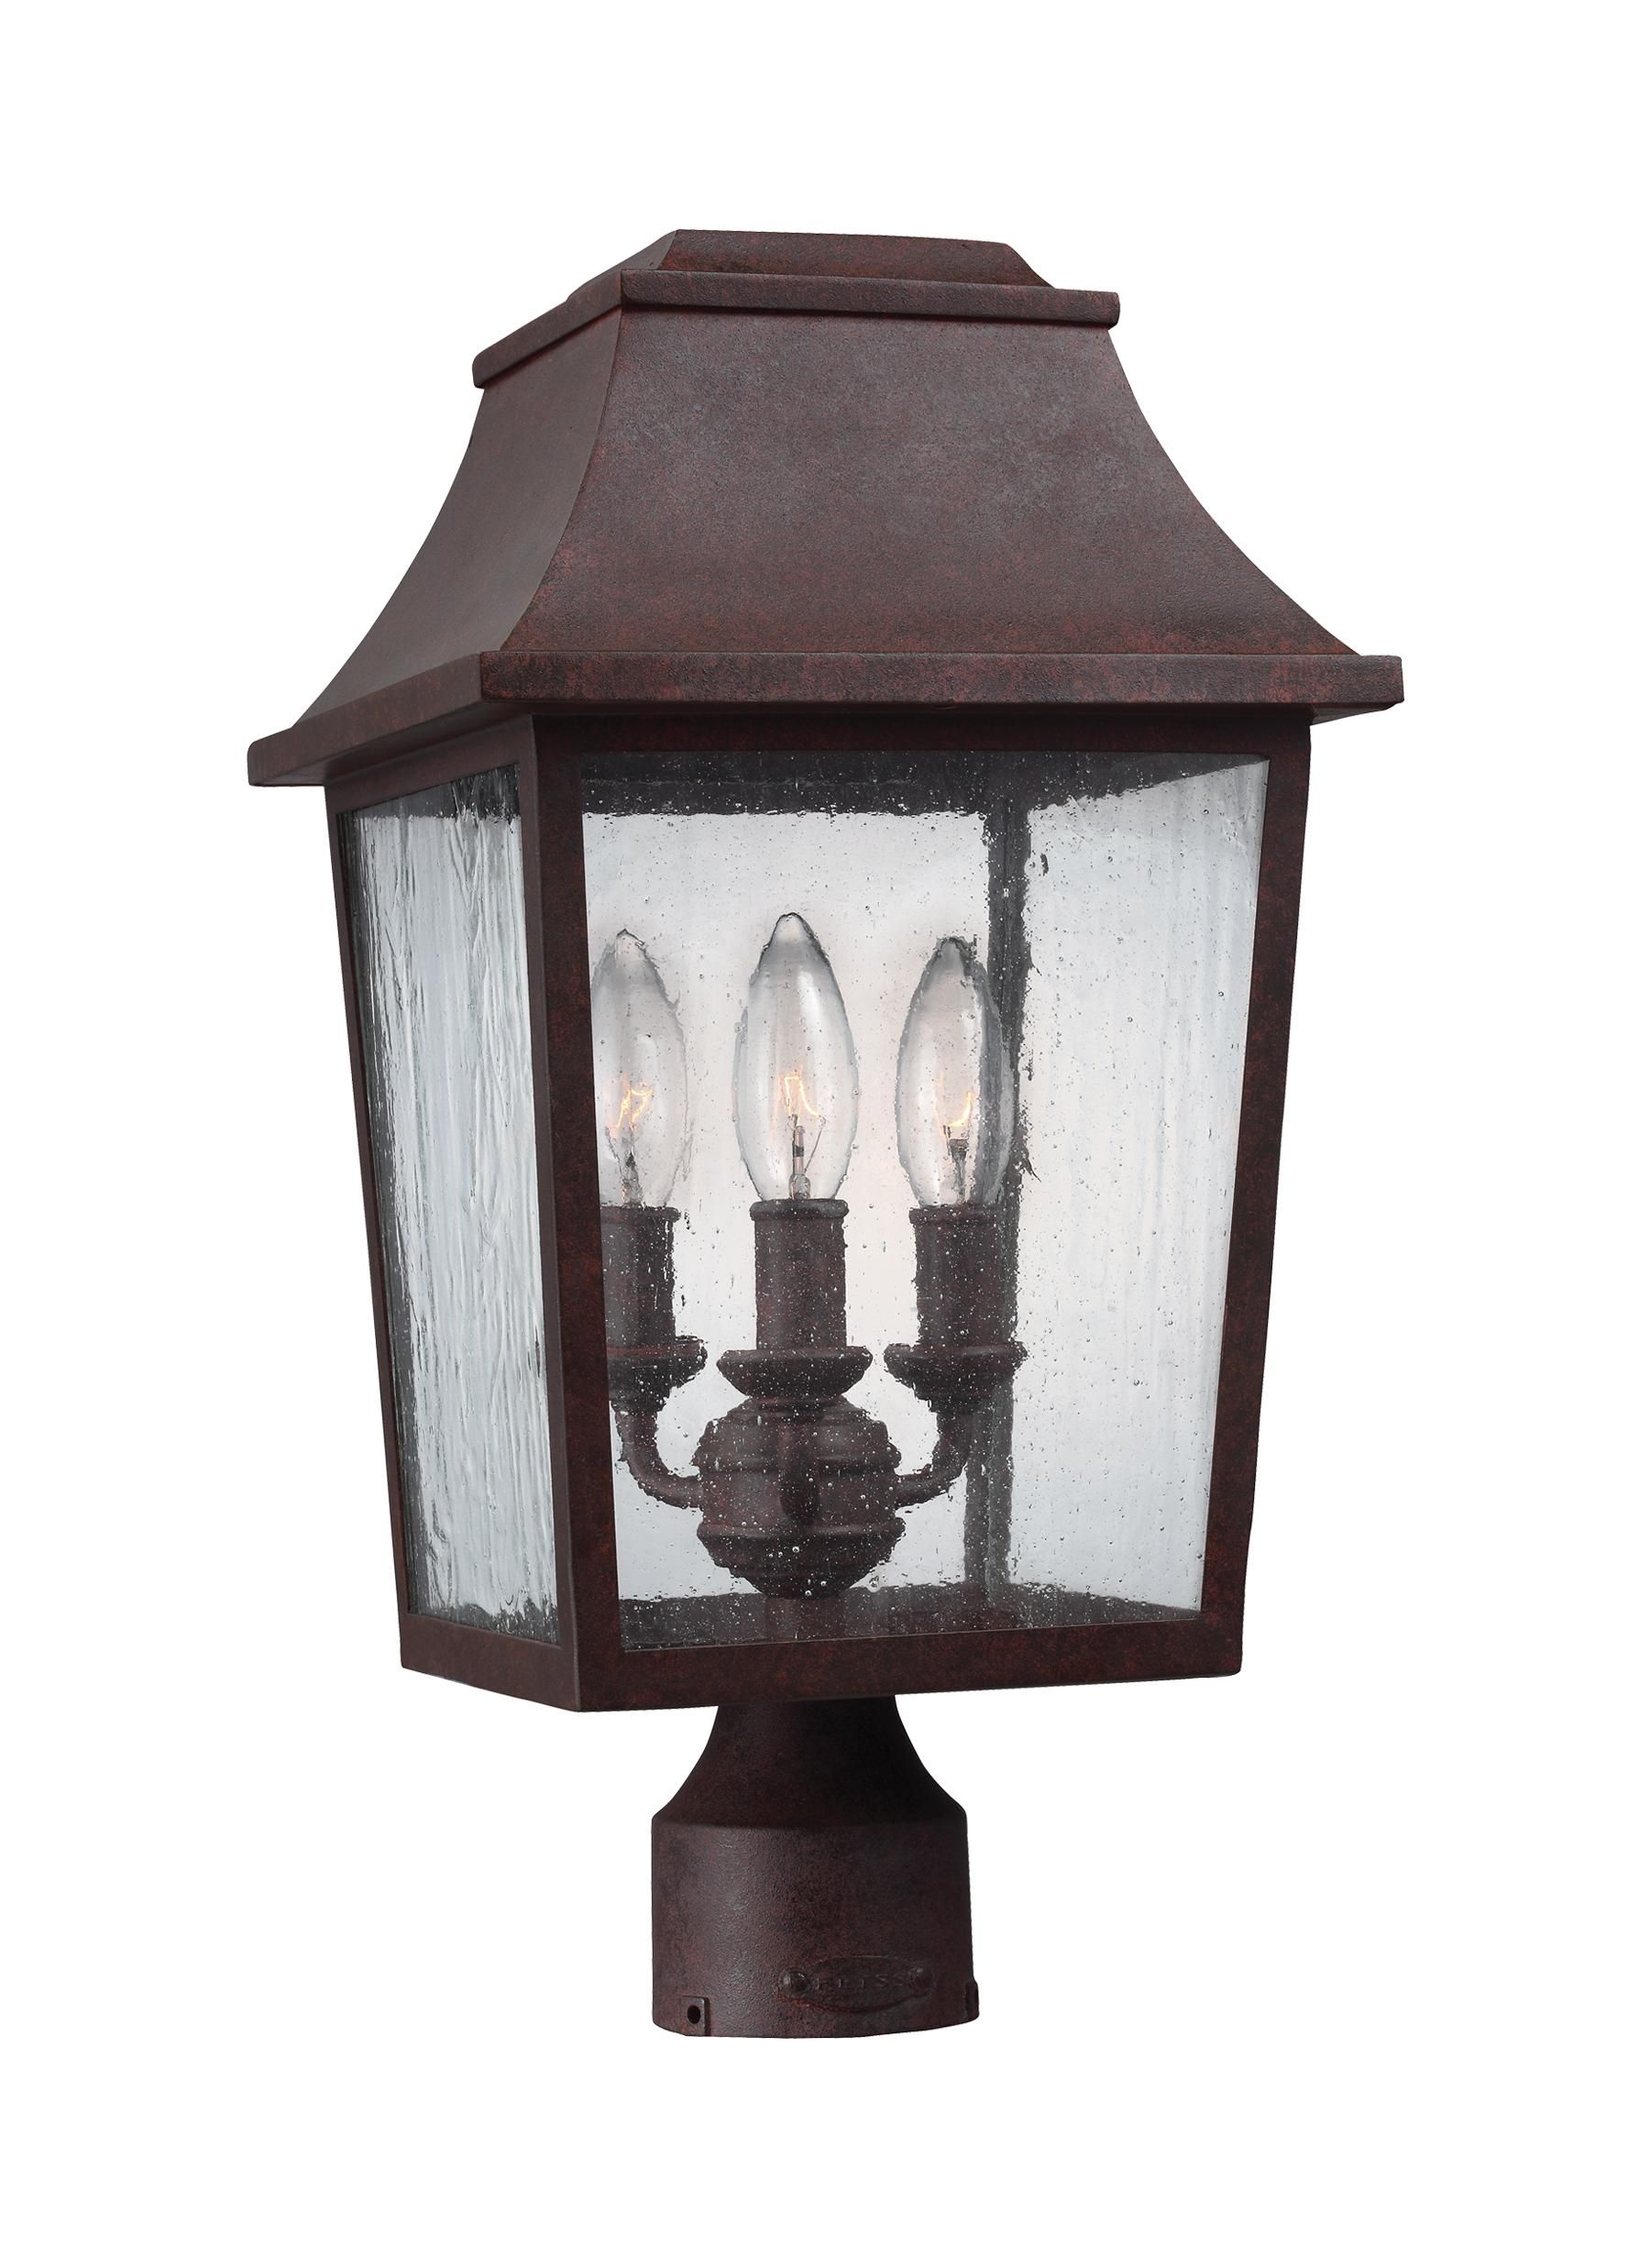 Ol11909pcr,3 – Light Outdoor Post Lantern,patina Copper Pertaining To Outdoor Wall And Post Lighting (View 7 of 15)